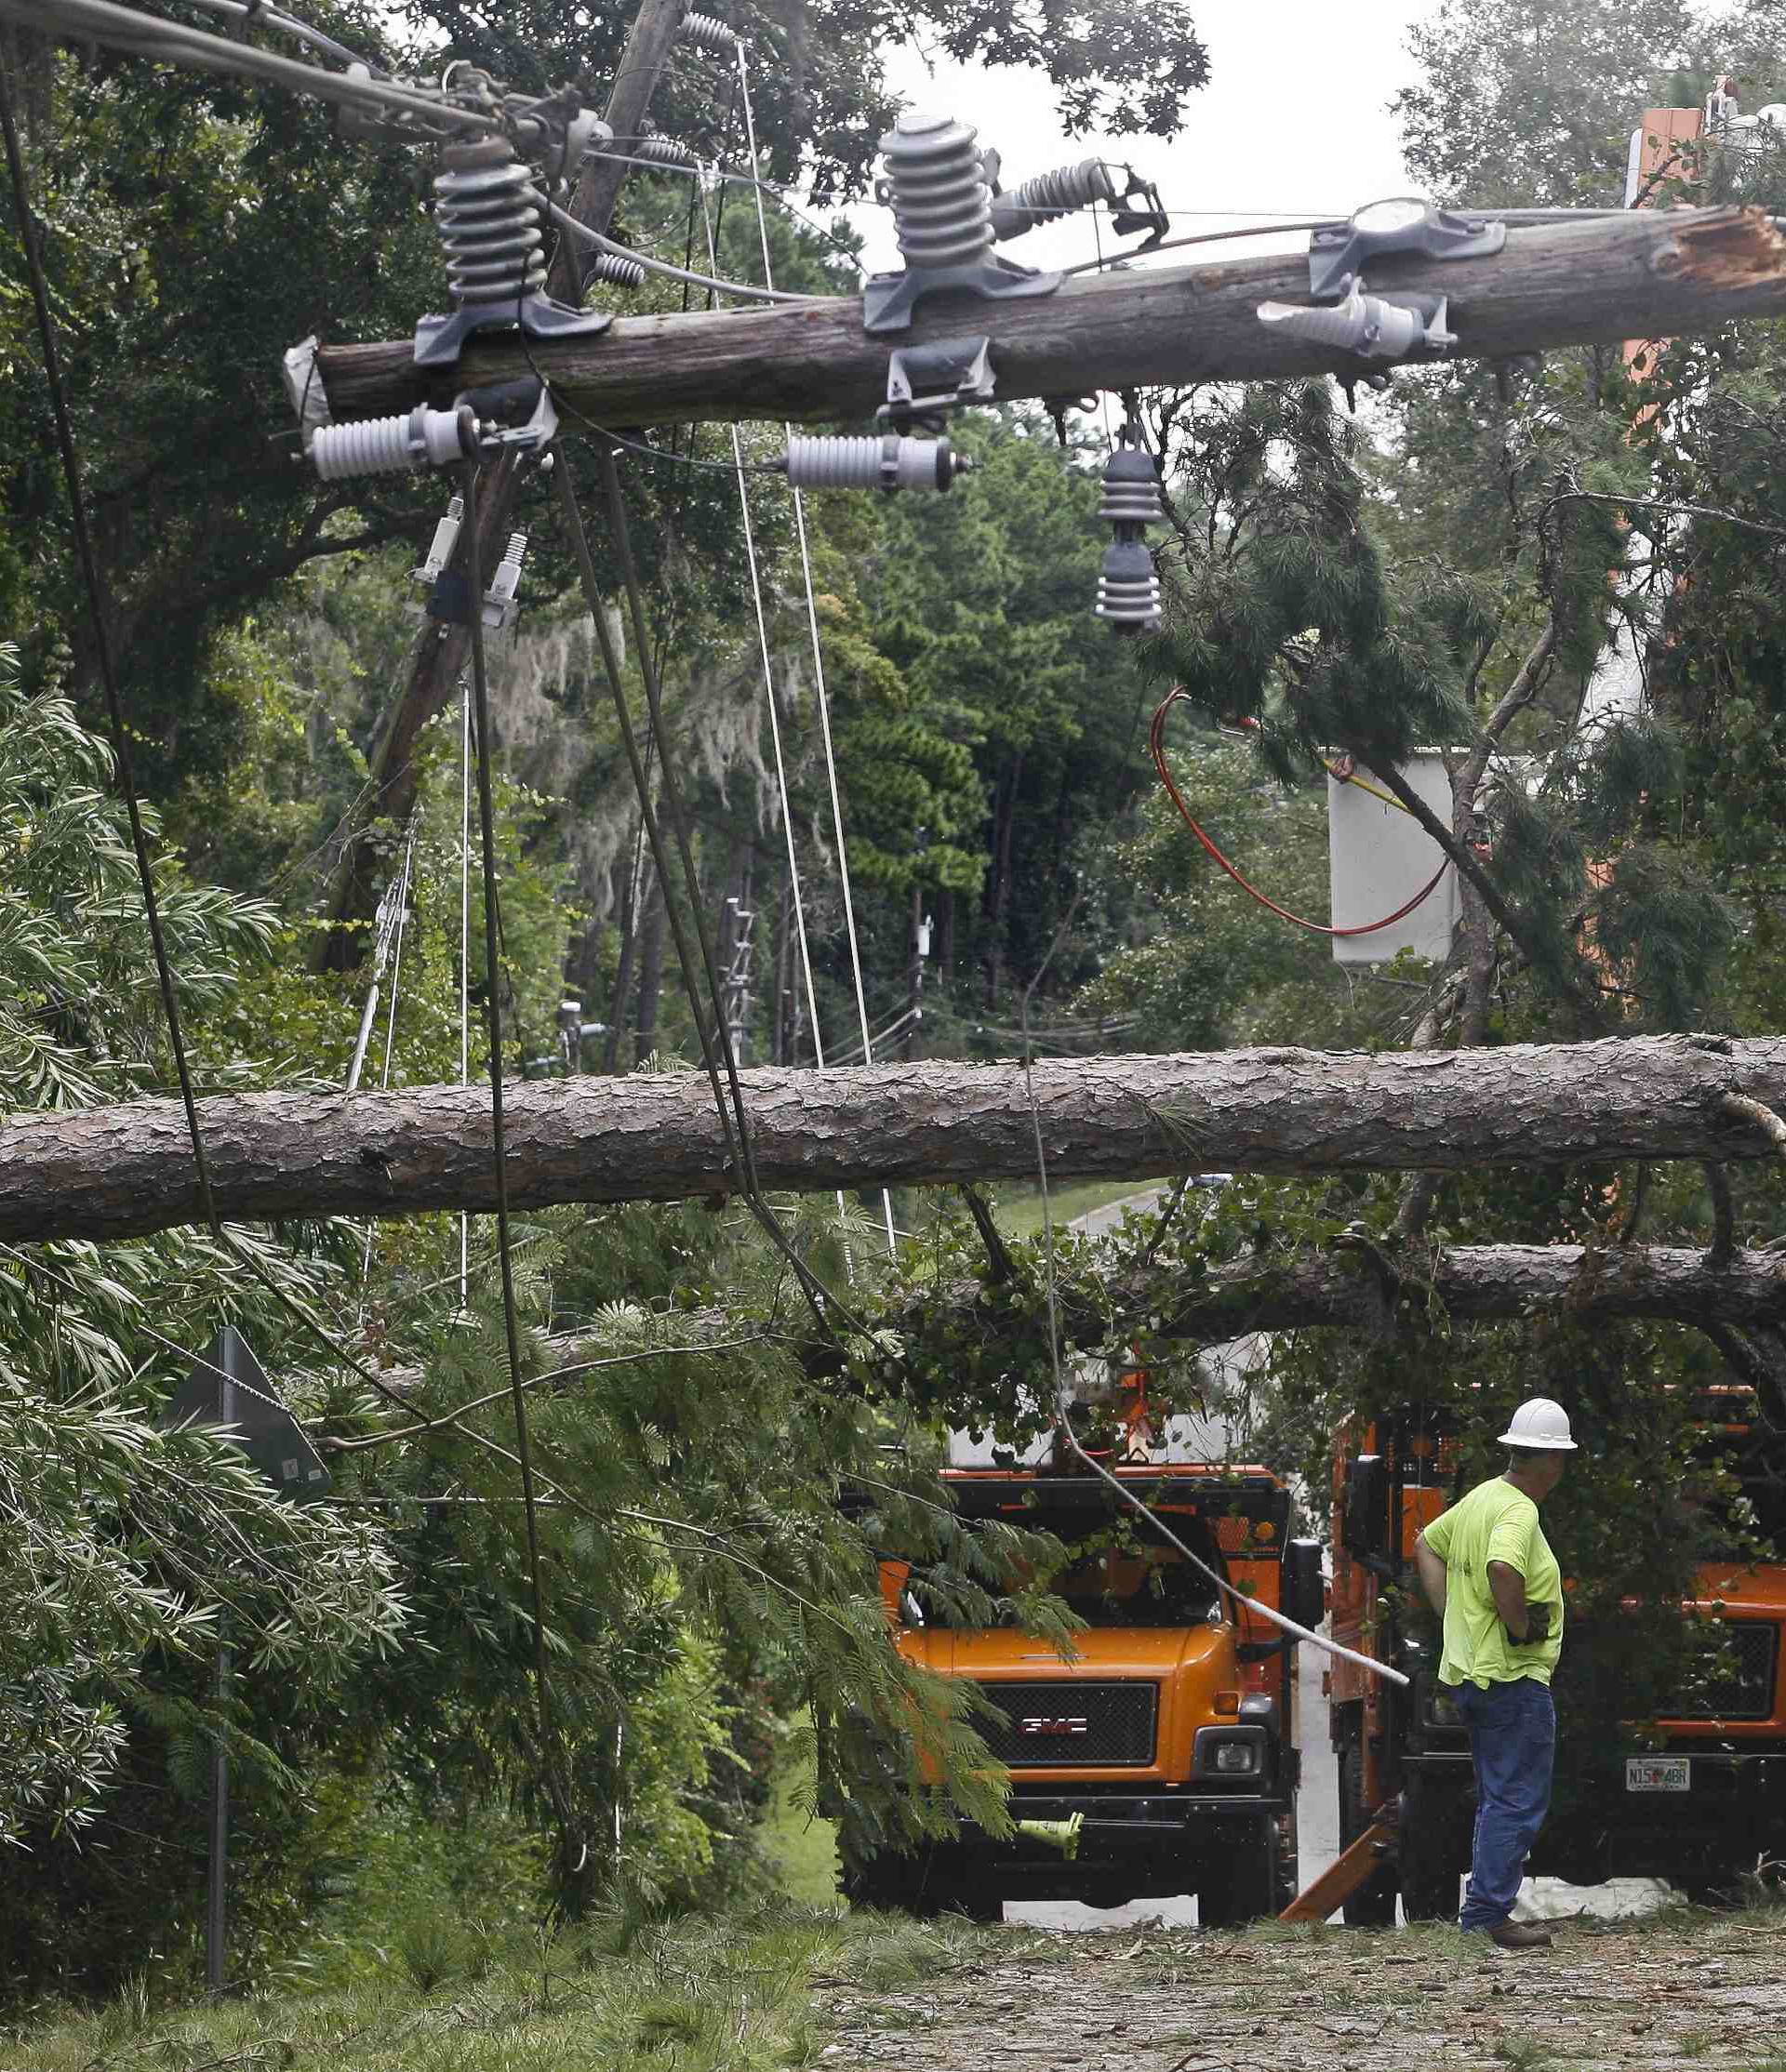 Workers remove downed trees during cleanup operations in the aftermath of Hurricane Hermine in Tallahassee